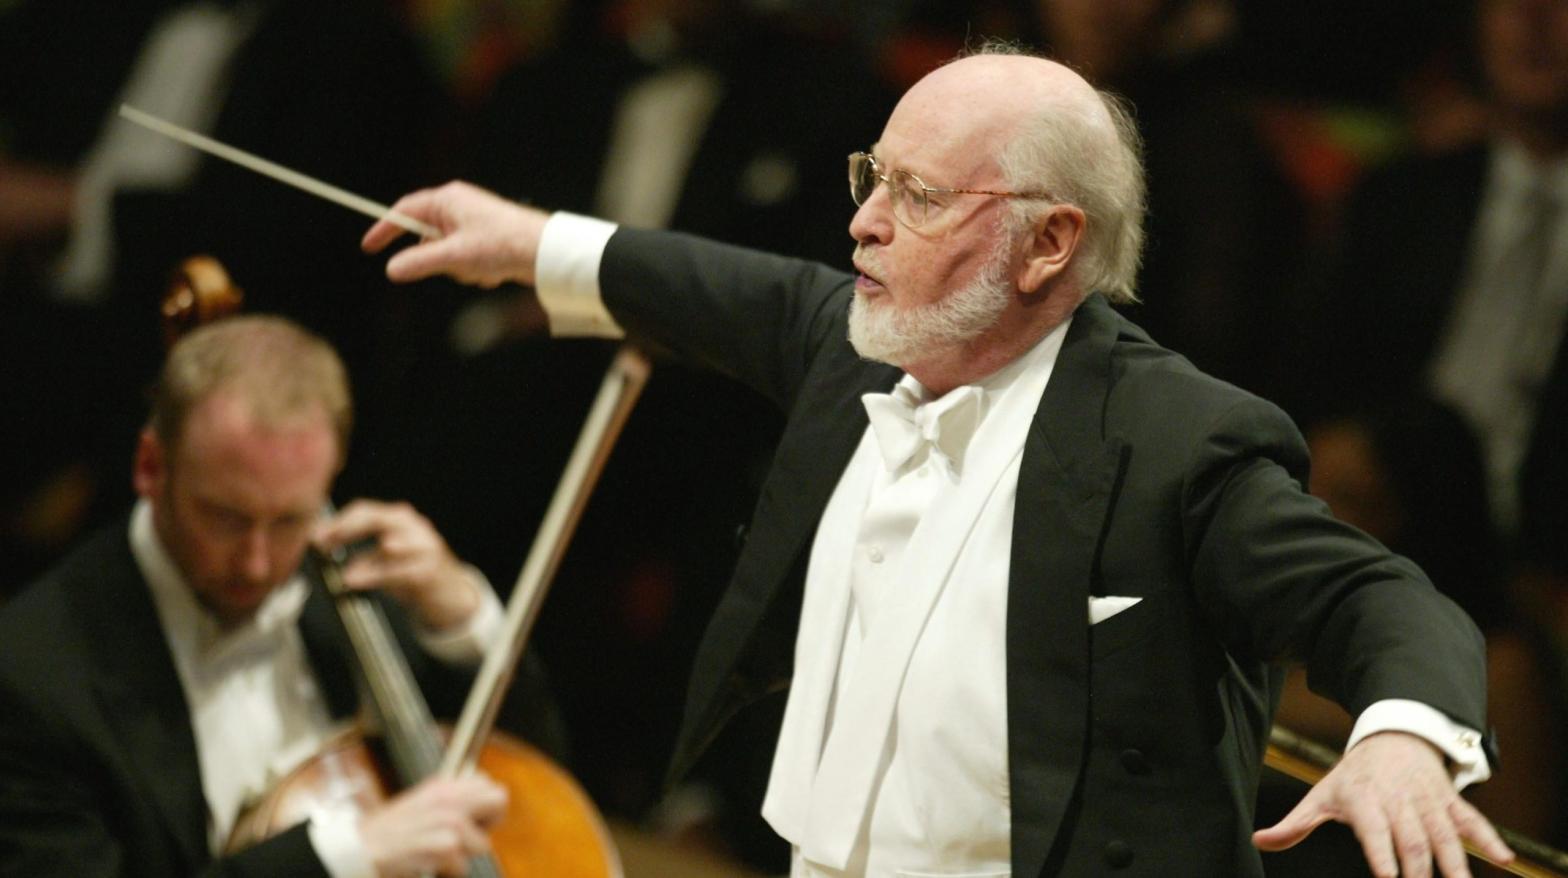 Composer John Williams performs on stage at the Walt Disney Concert Hall on October 25, 2003 in Los Angeles, California. (Photo: Carlo Allegri/Getty Images for LAPA, Getty Images)